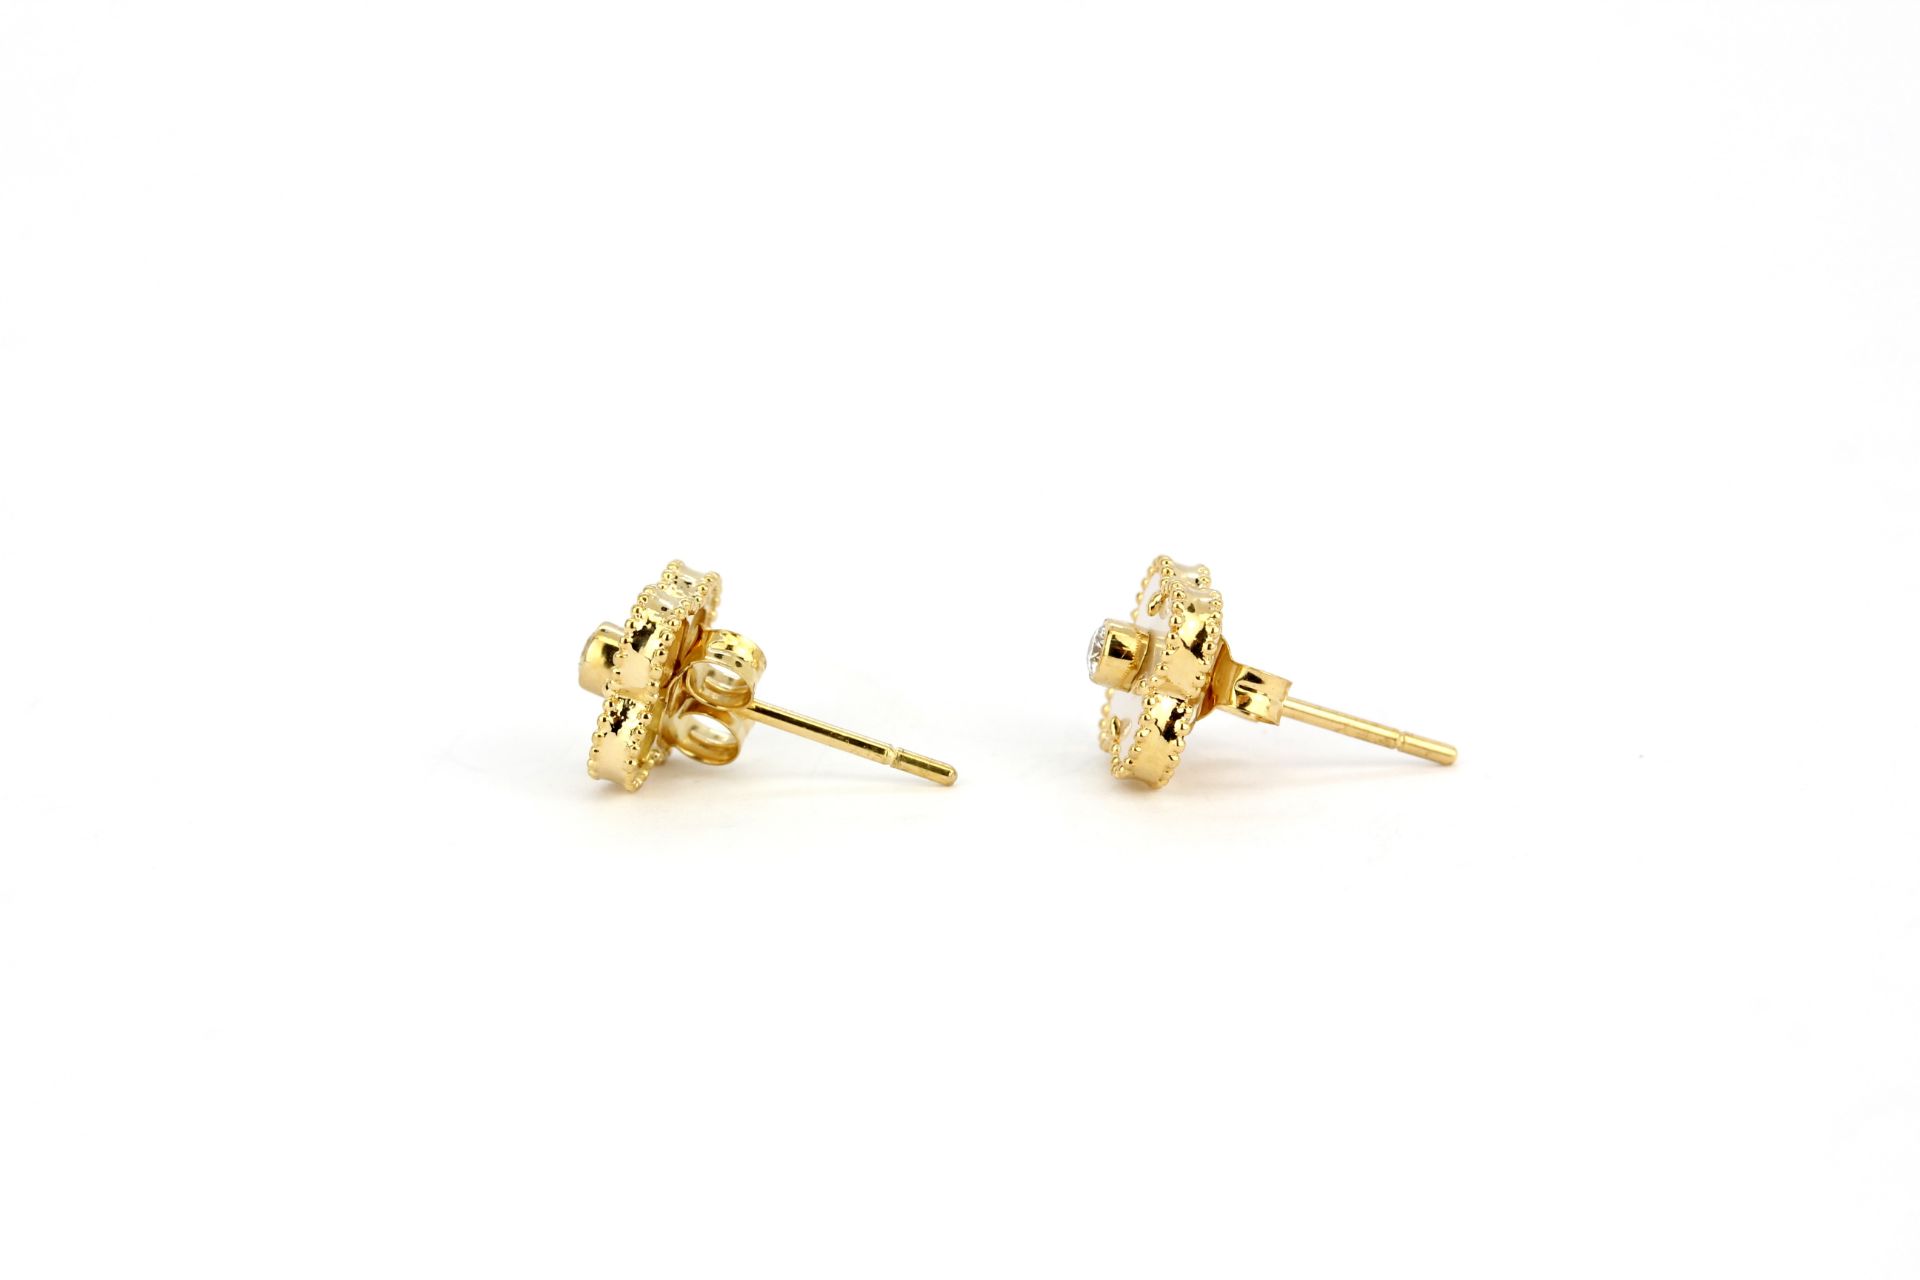 A pair of 18ct yellow gold (stamped 18K) stud earrings set with mother of pearl and a diamond, L. - Image 2 of 4